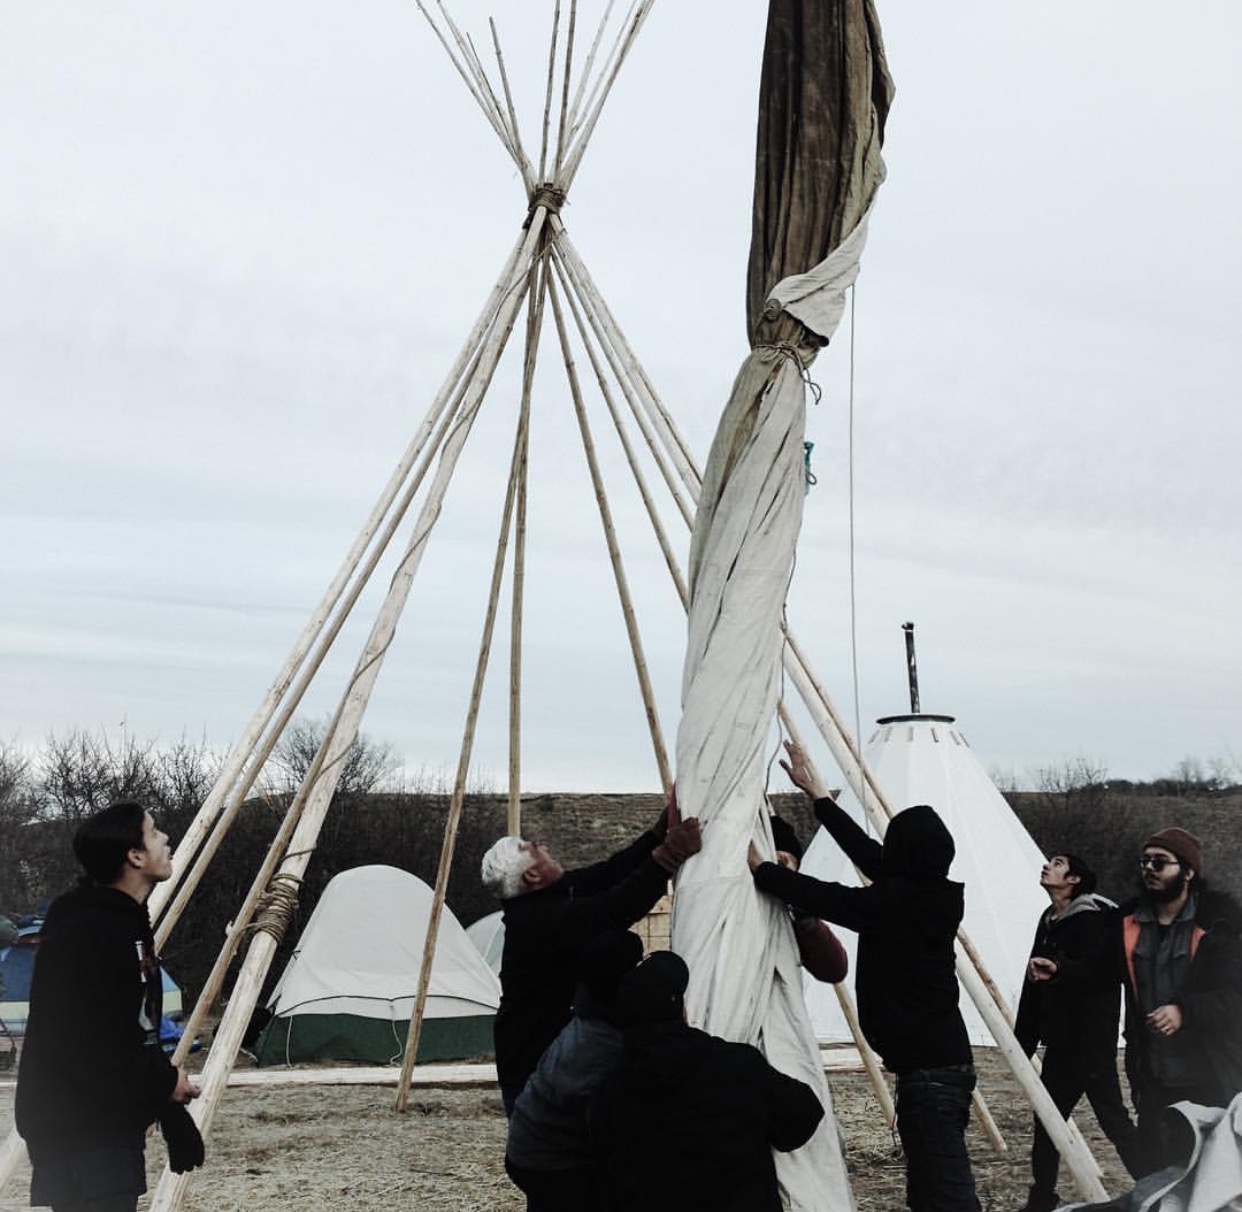 Setting up the tipi at IIYC camp. Photo credit: Luis Raul